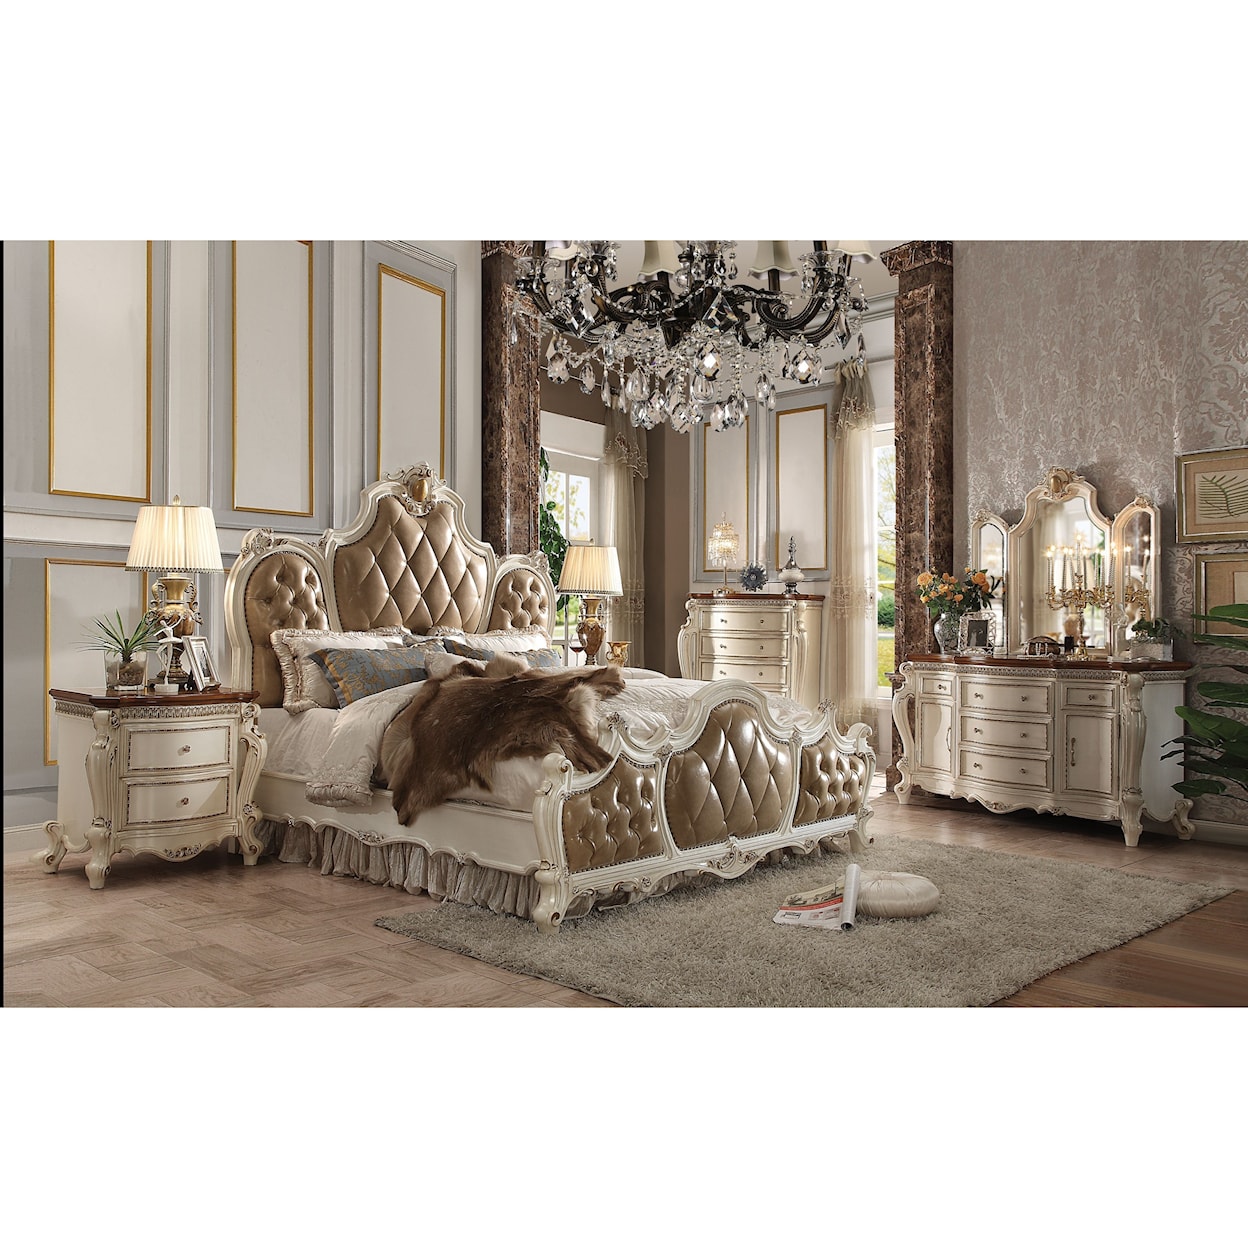 Acme Furniture Picardy 7pc Queen Bedroom Group